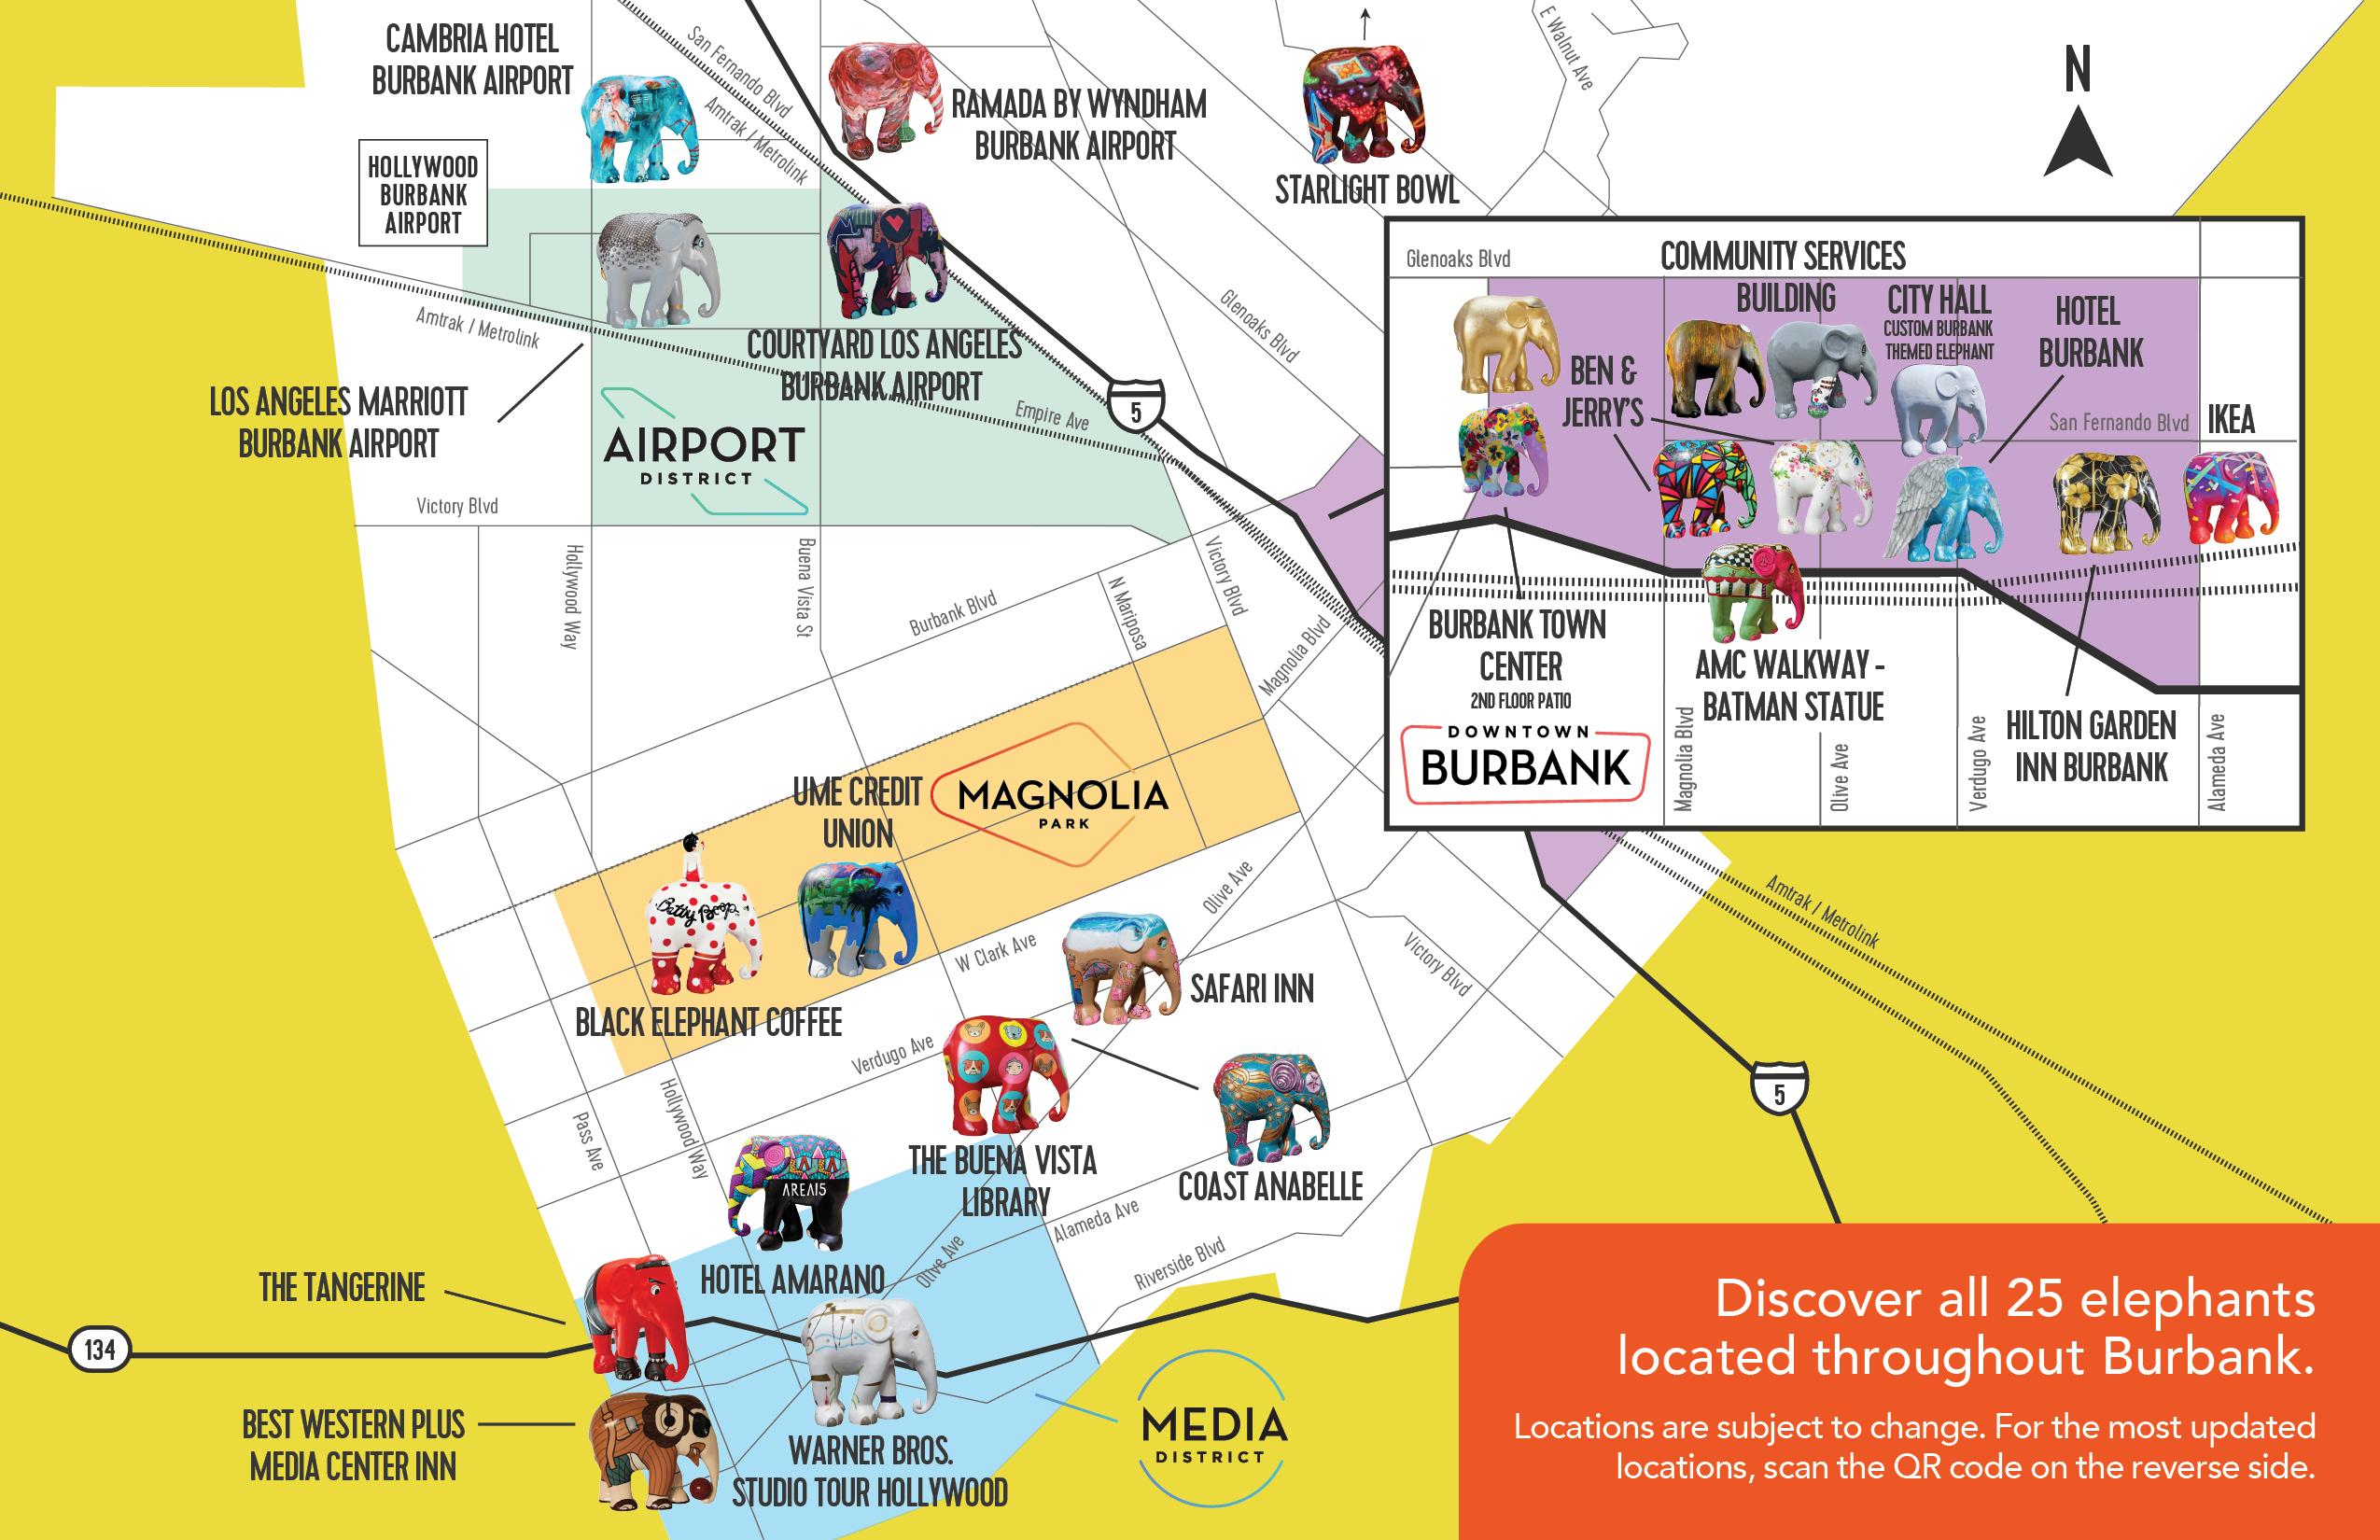 Detailed map of Burbank with images to notate where all the elephants are located